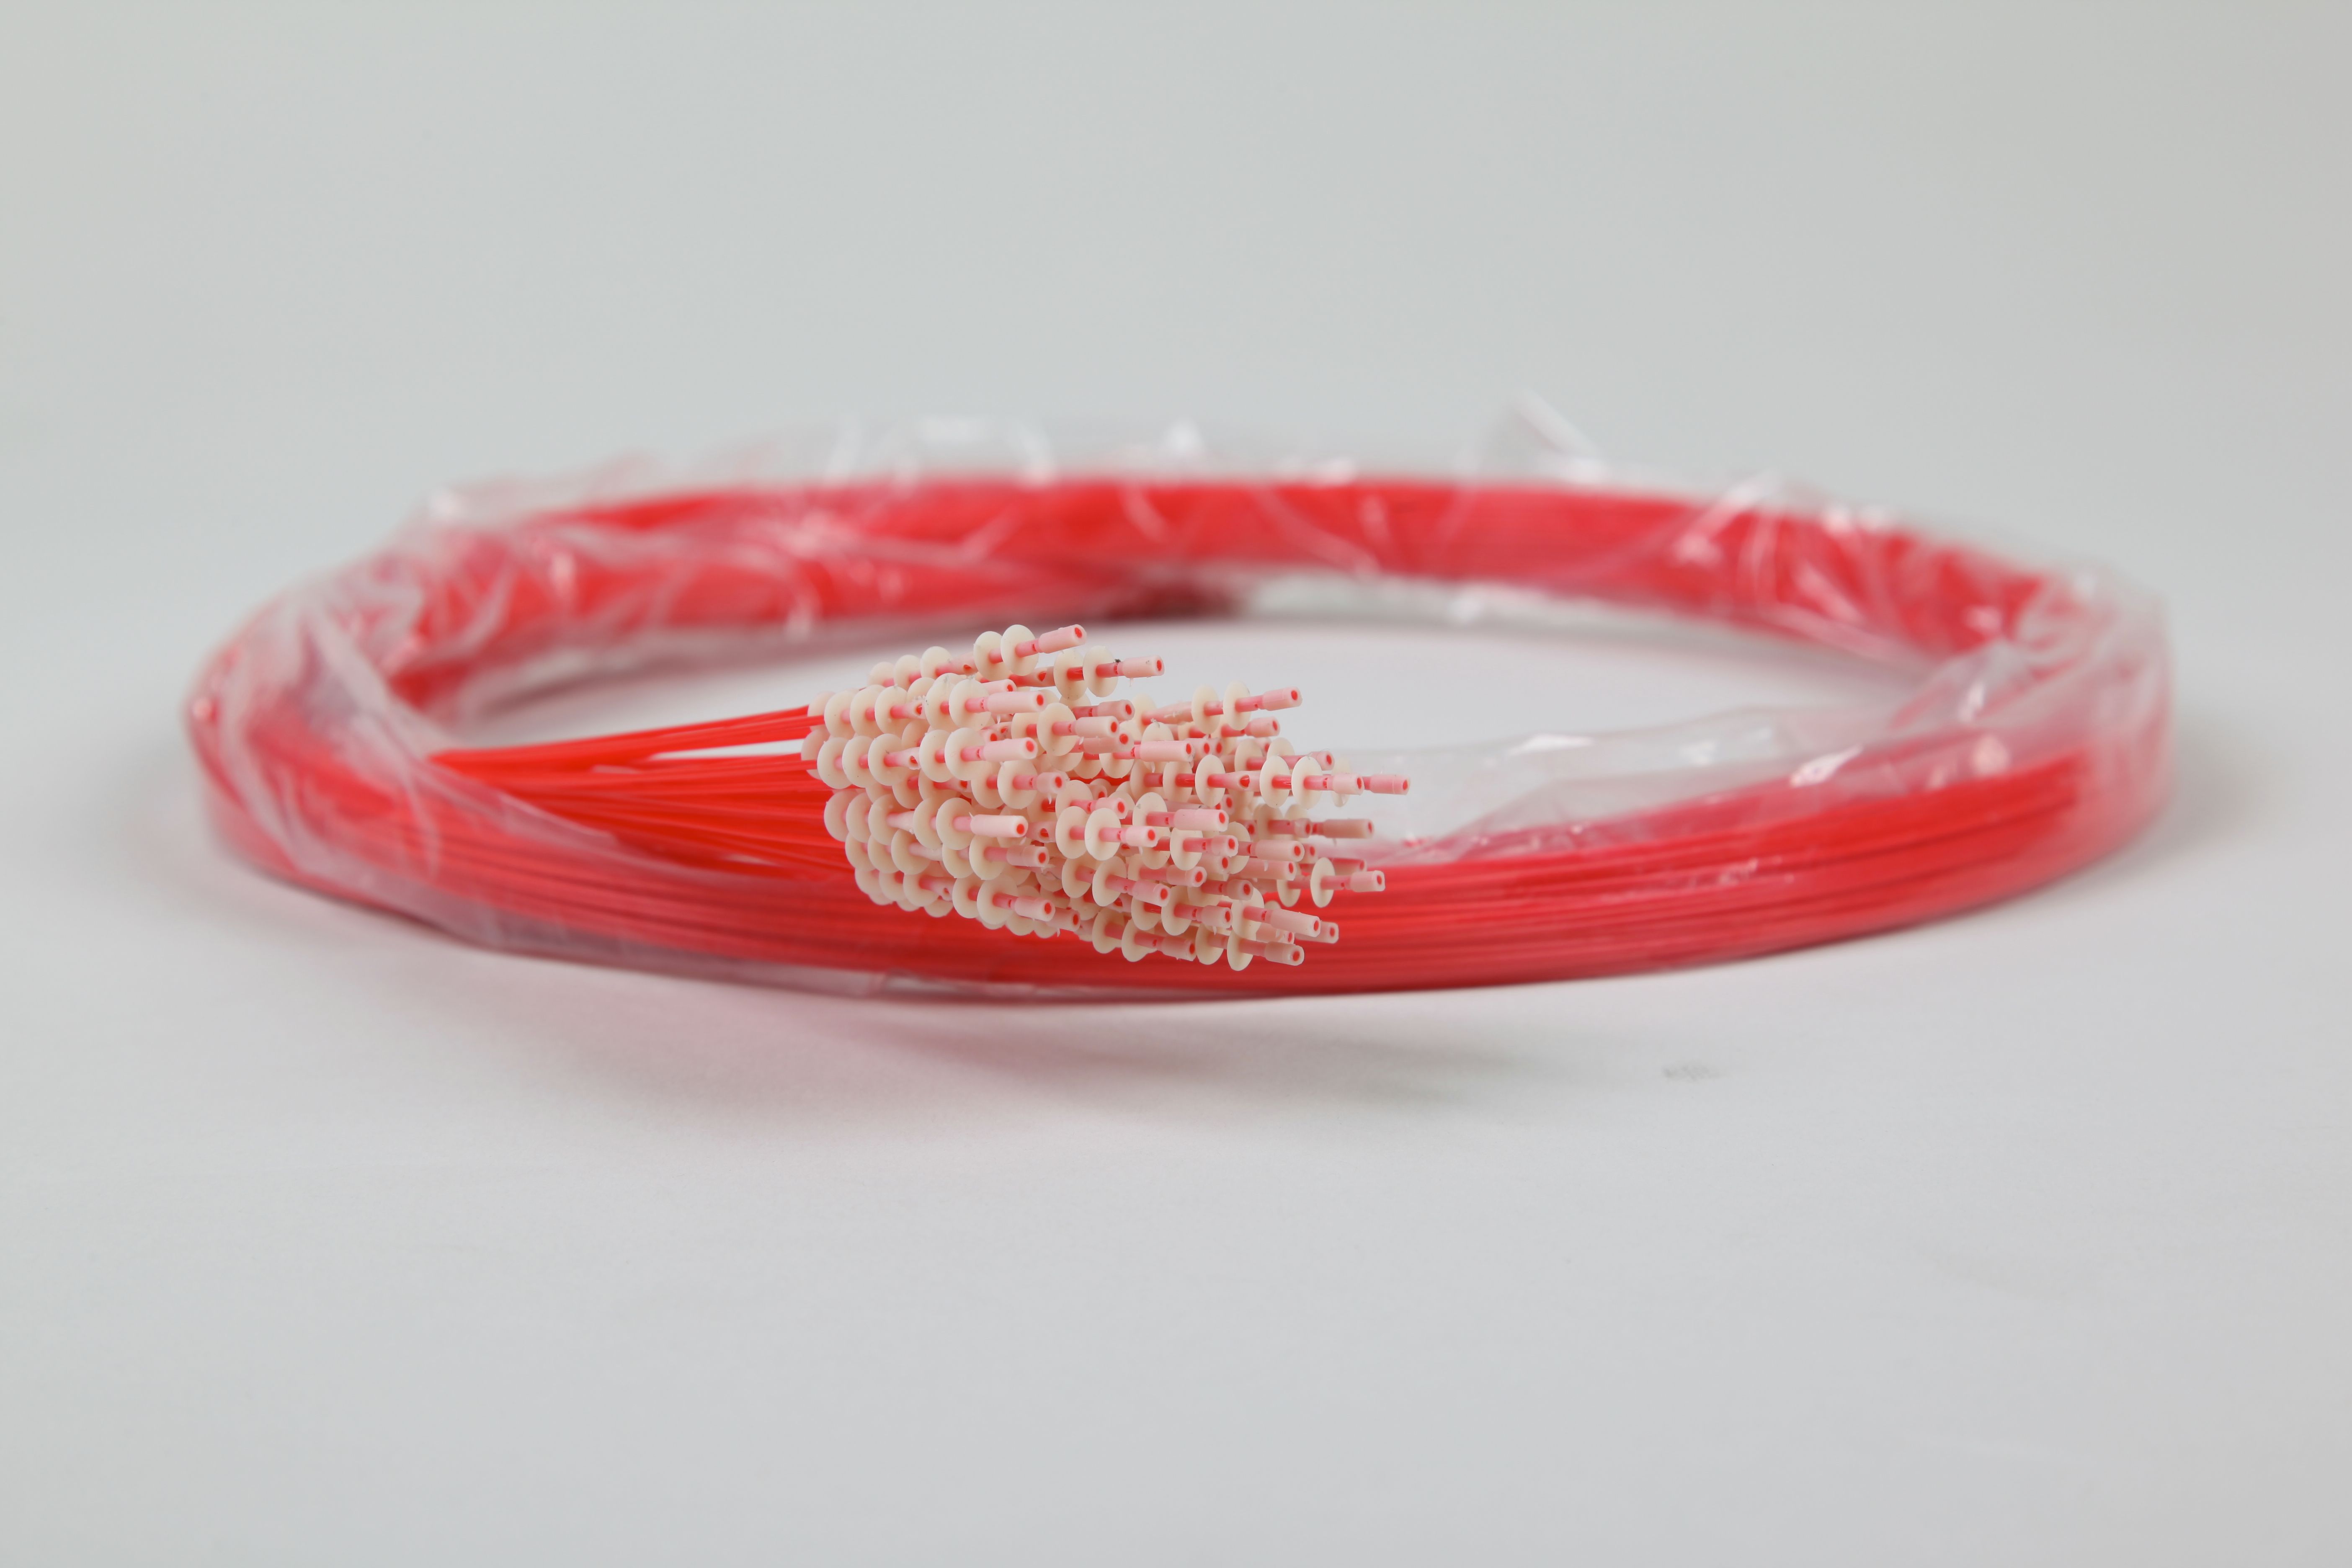 Pull Thru Cleaning Brush (Red) for 2.8-5.0mm Channels 220cm - 240 pieces